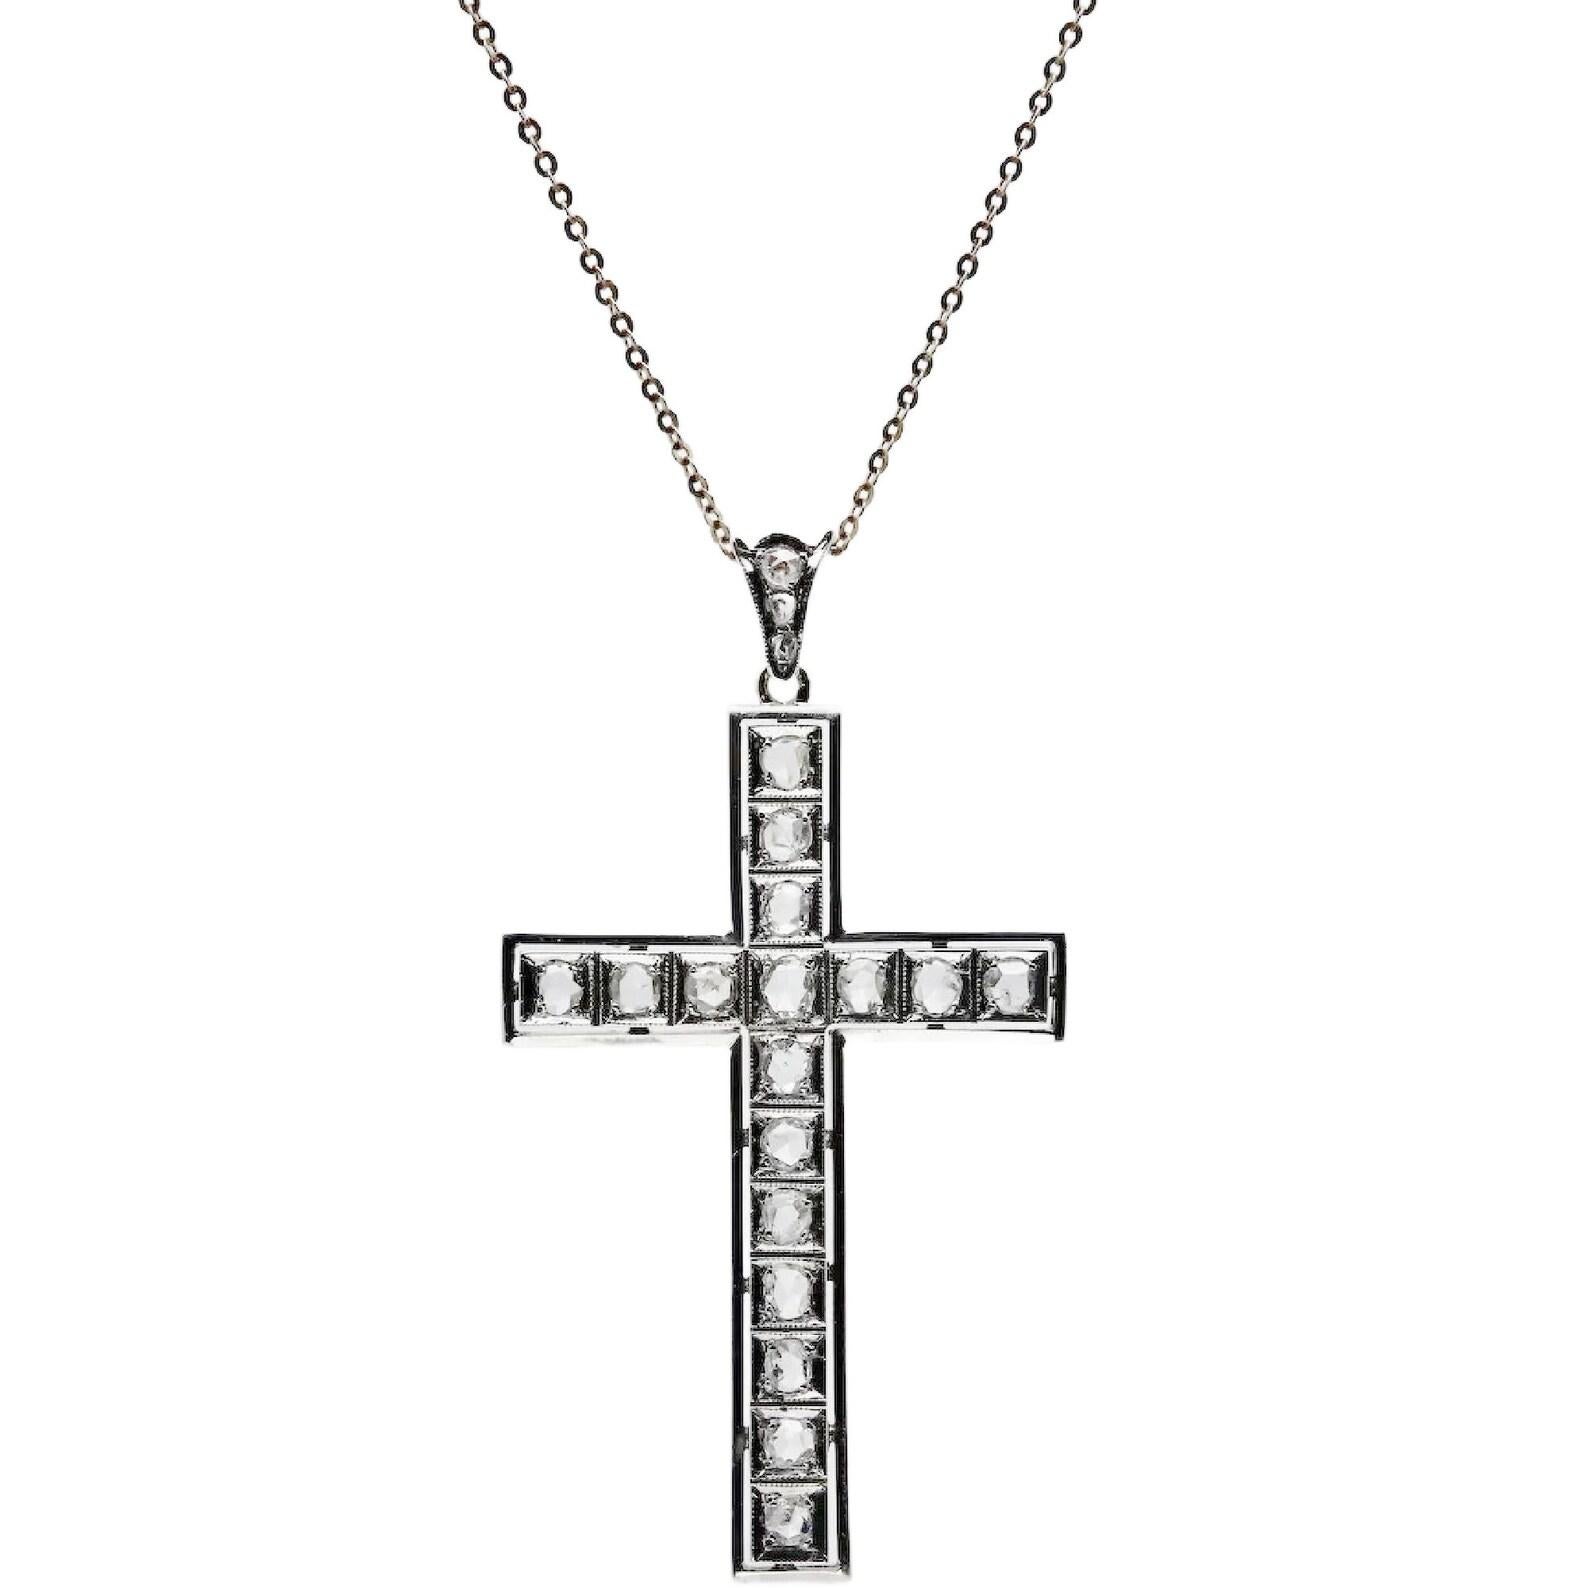 An antique Art Deco period rose cut diamond cross in platinum and 14 karat yellow gold. Set throughout this beautiful cross are a total of 20 G color, VS clarity antique rose cut diamonds. Weighing a combined 1.05 carats total weight the diamonds